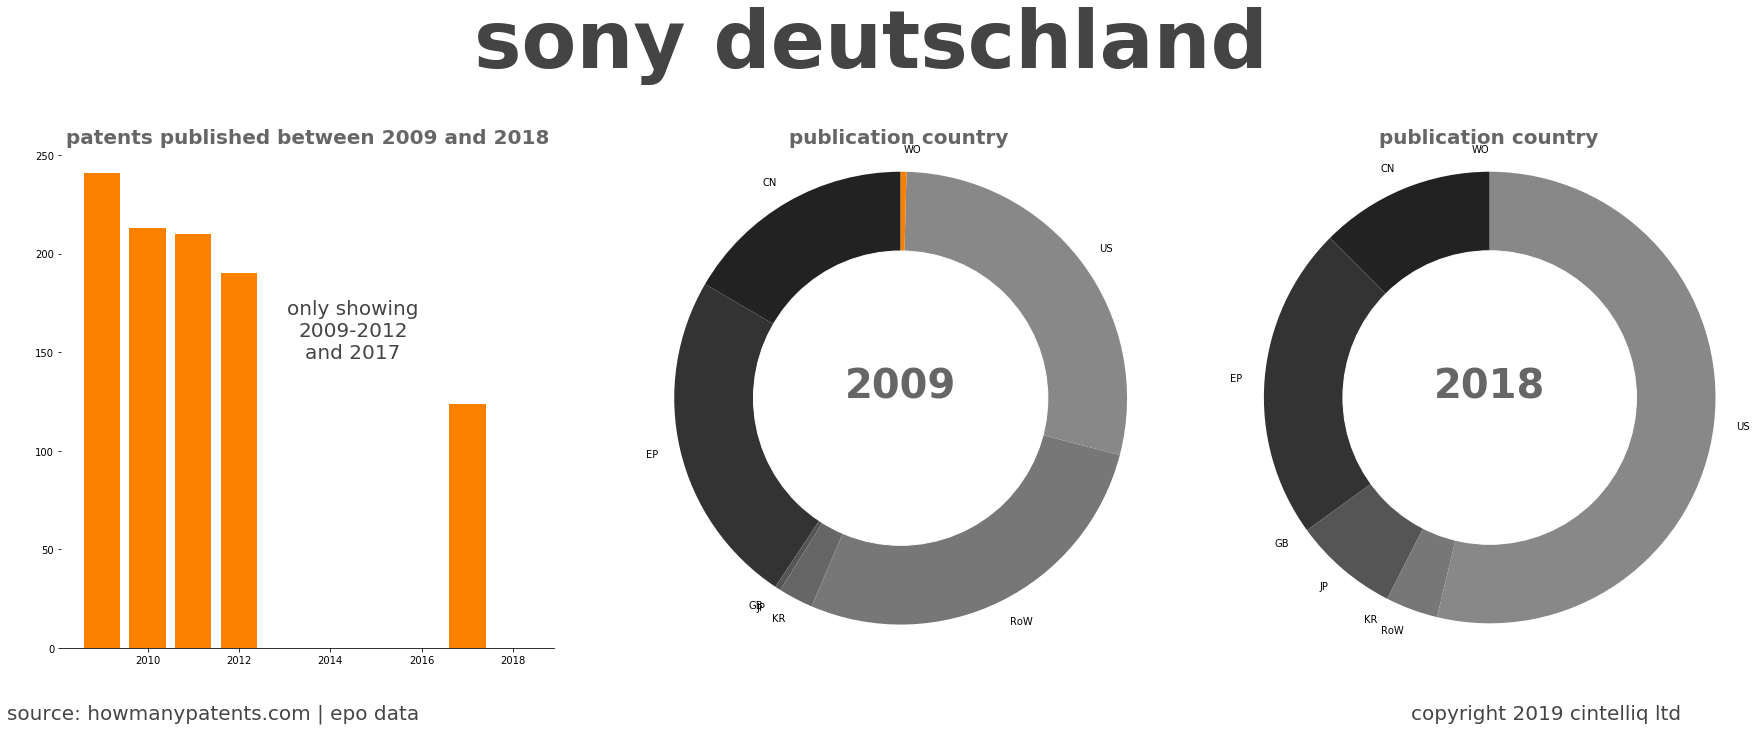 summary of patents for Sony Deutschland